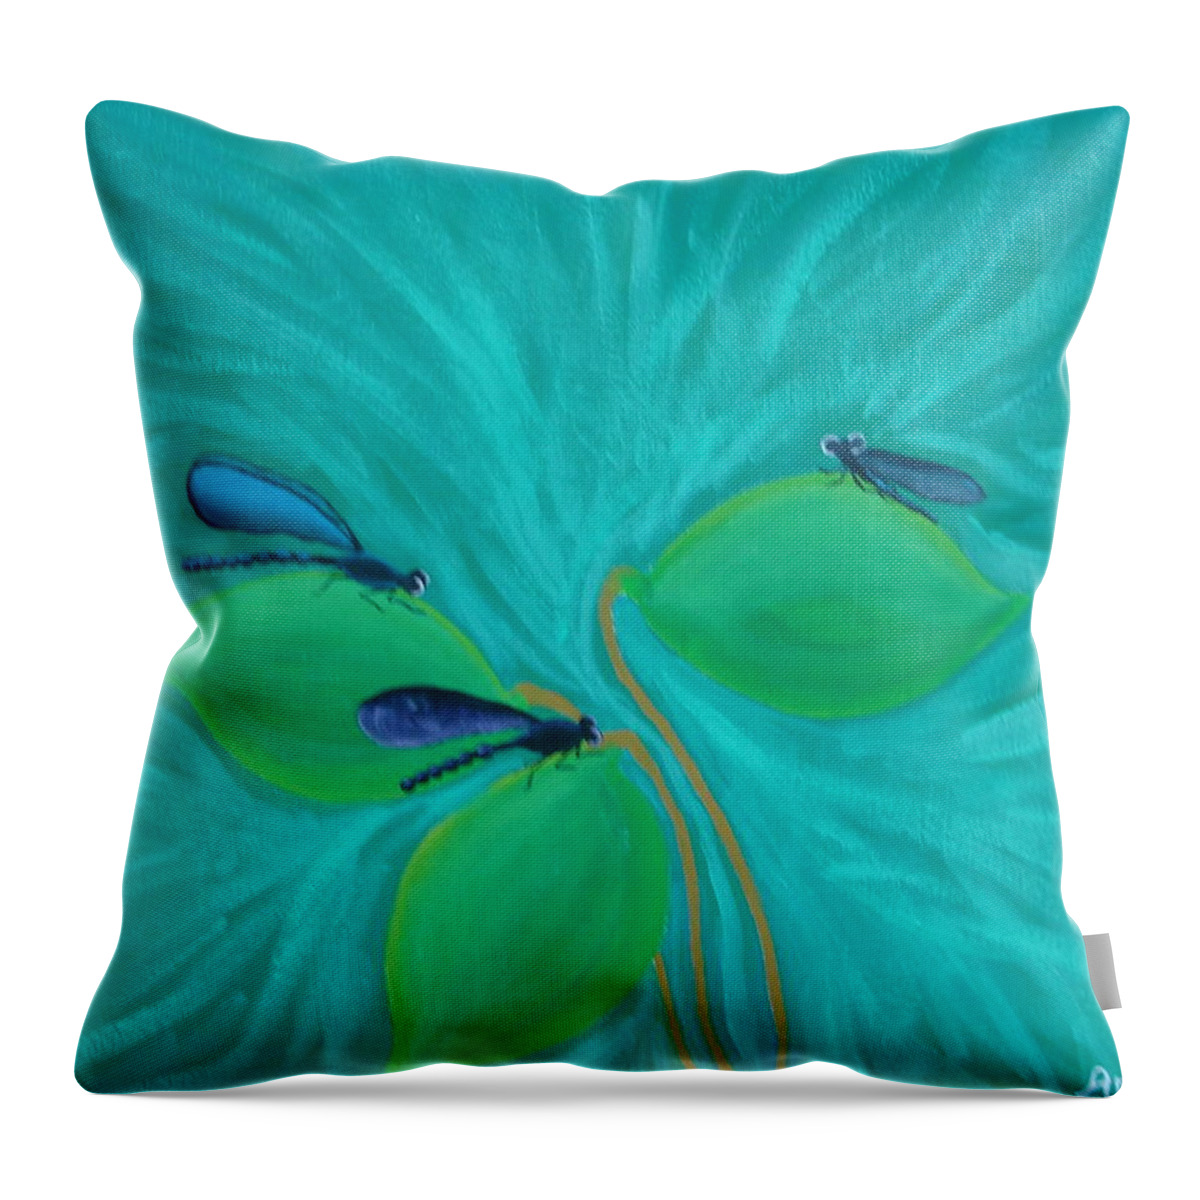 Dragonfly Throw Pillow featuring the painting Dragonfly Dreams by Angie Butler